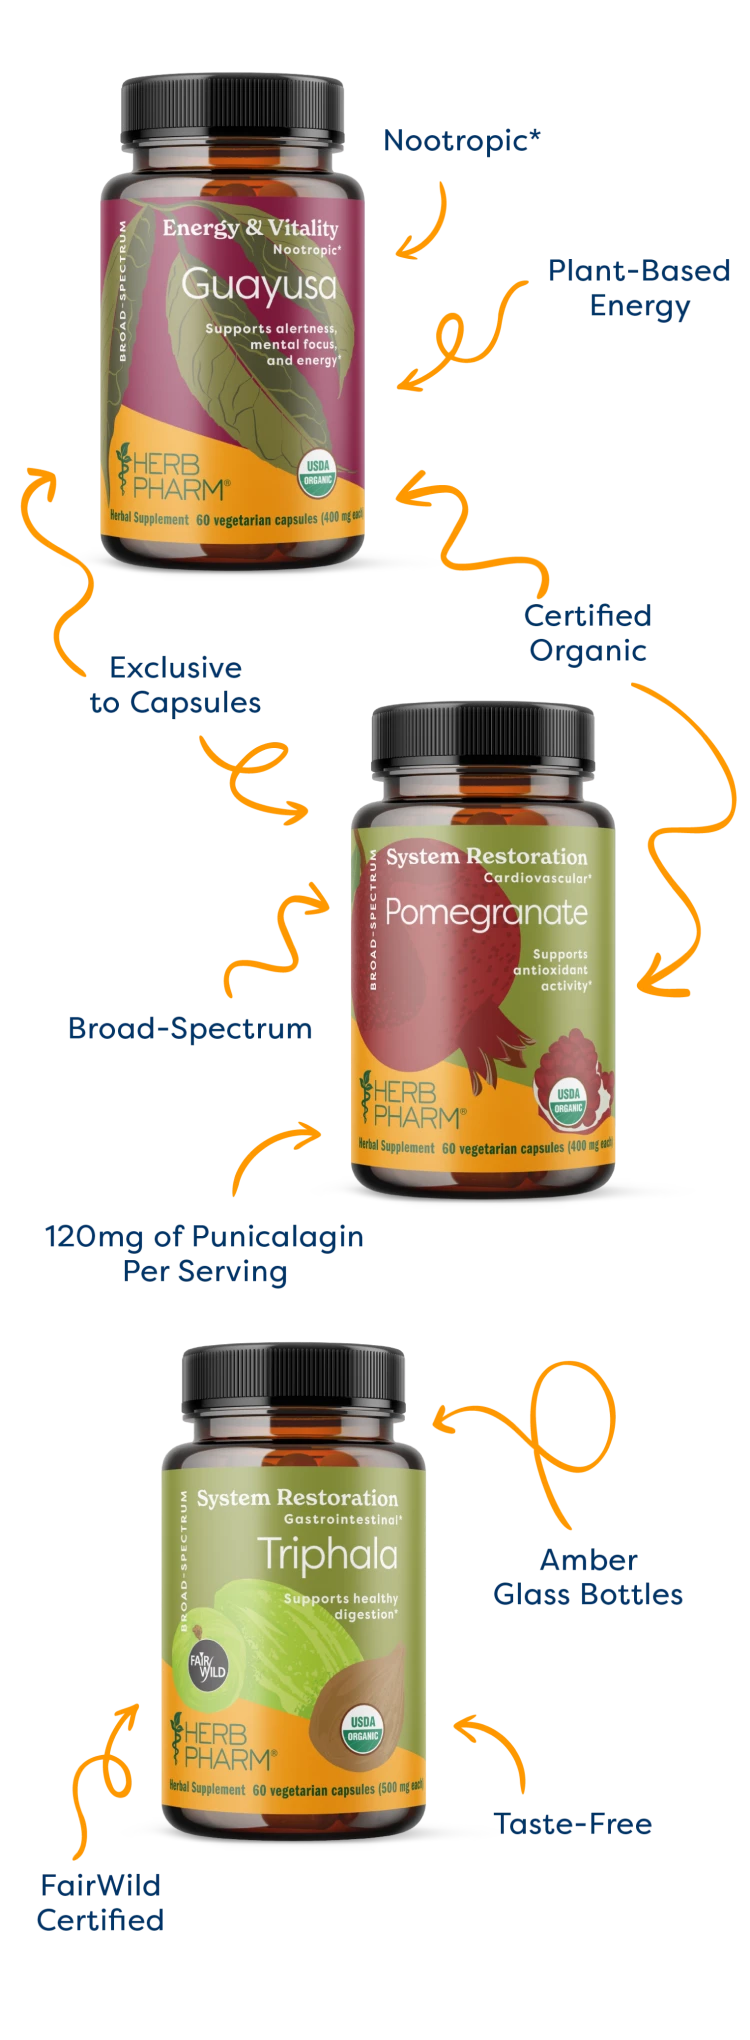 Plant based energy, exclusive to capsules